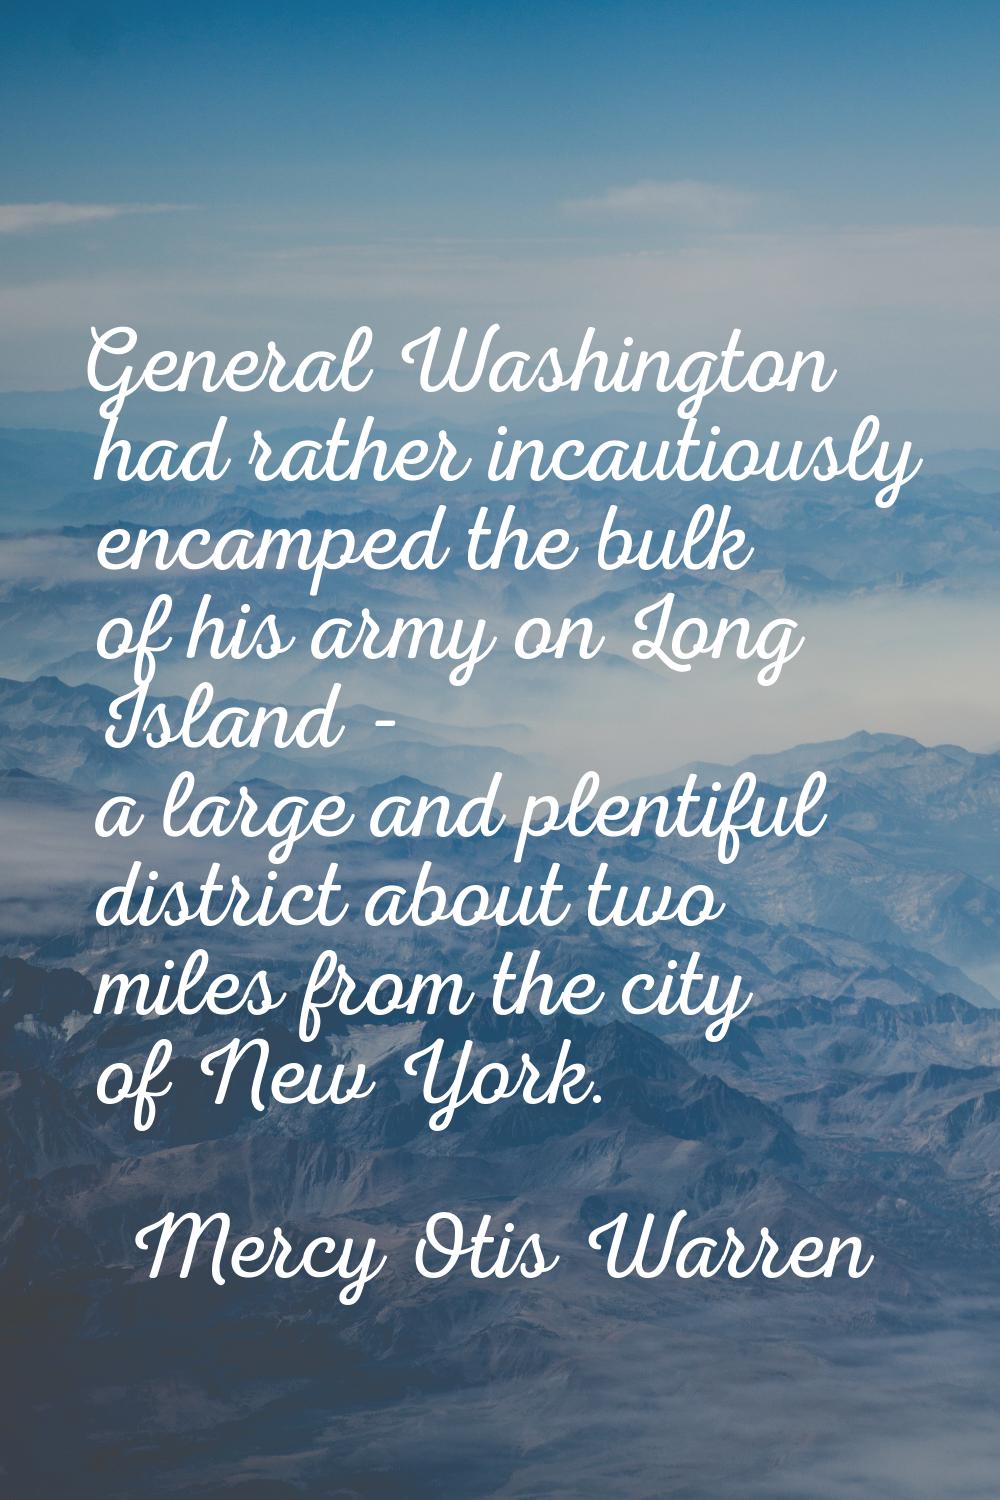 General Washington had rather incautiously encamped the bulk of his army on Long Island - a large a